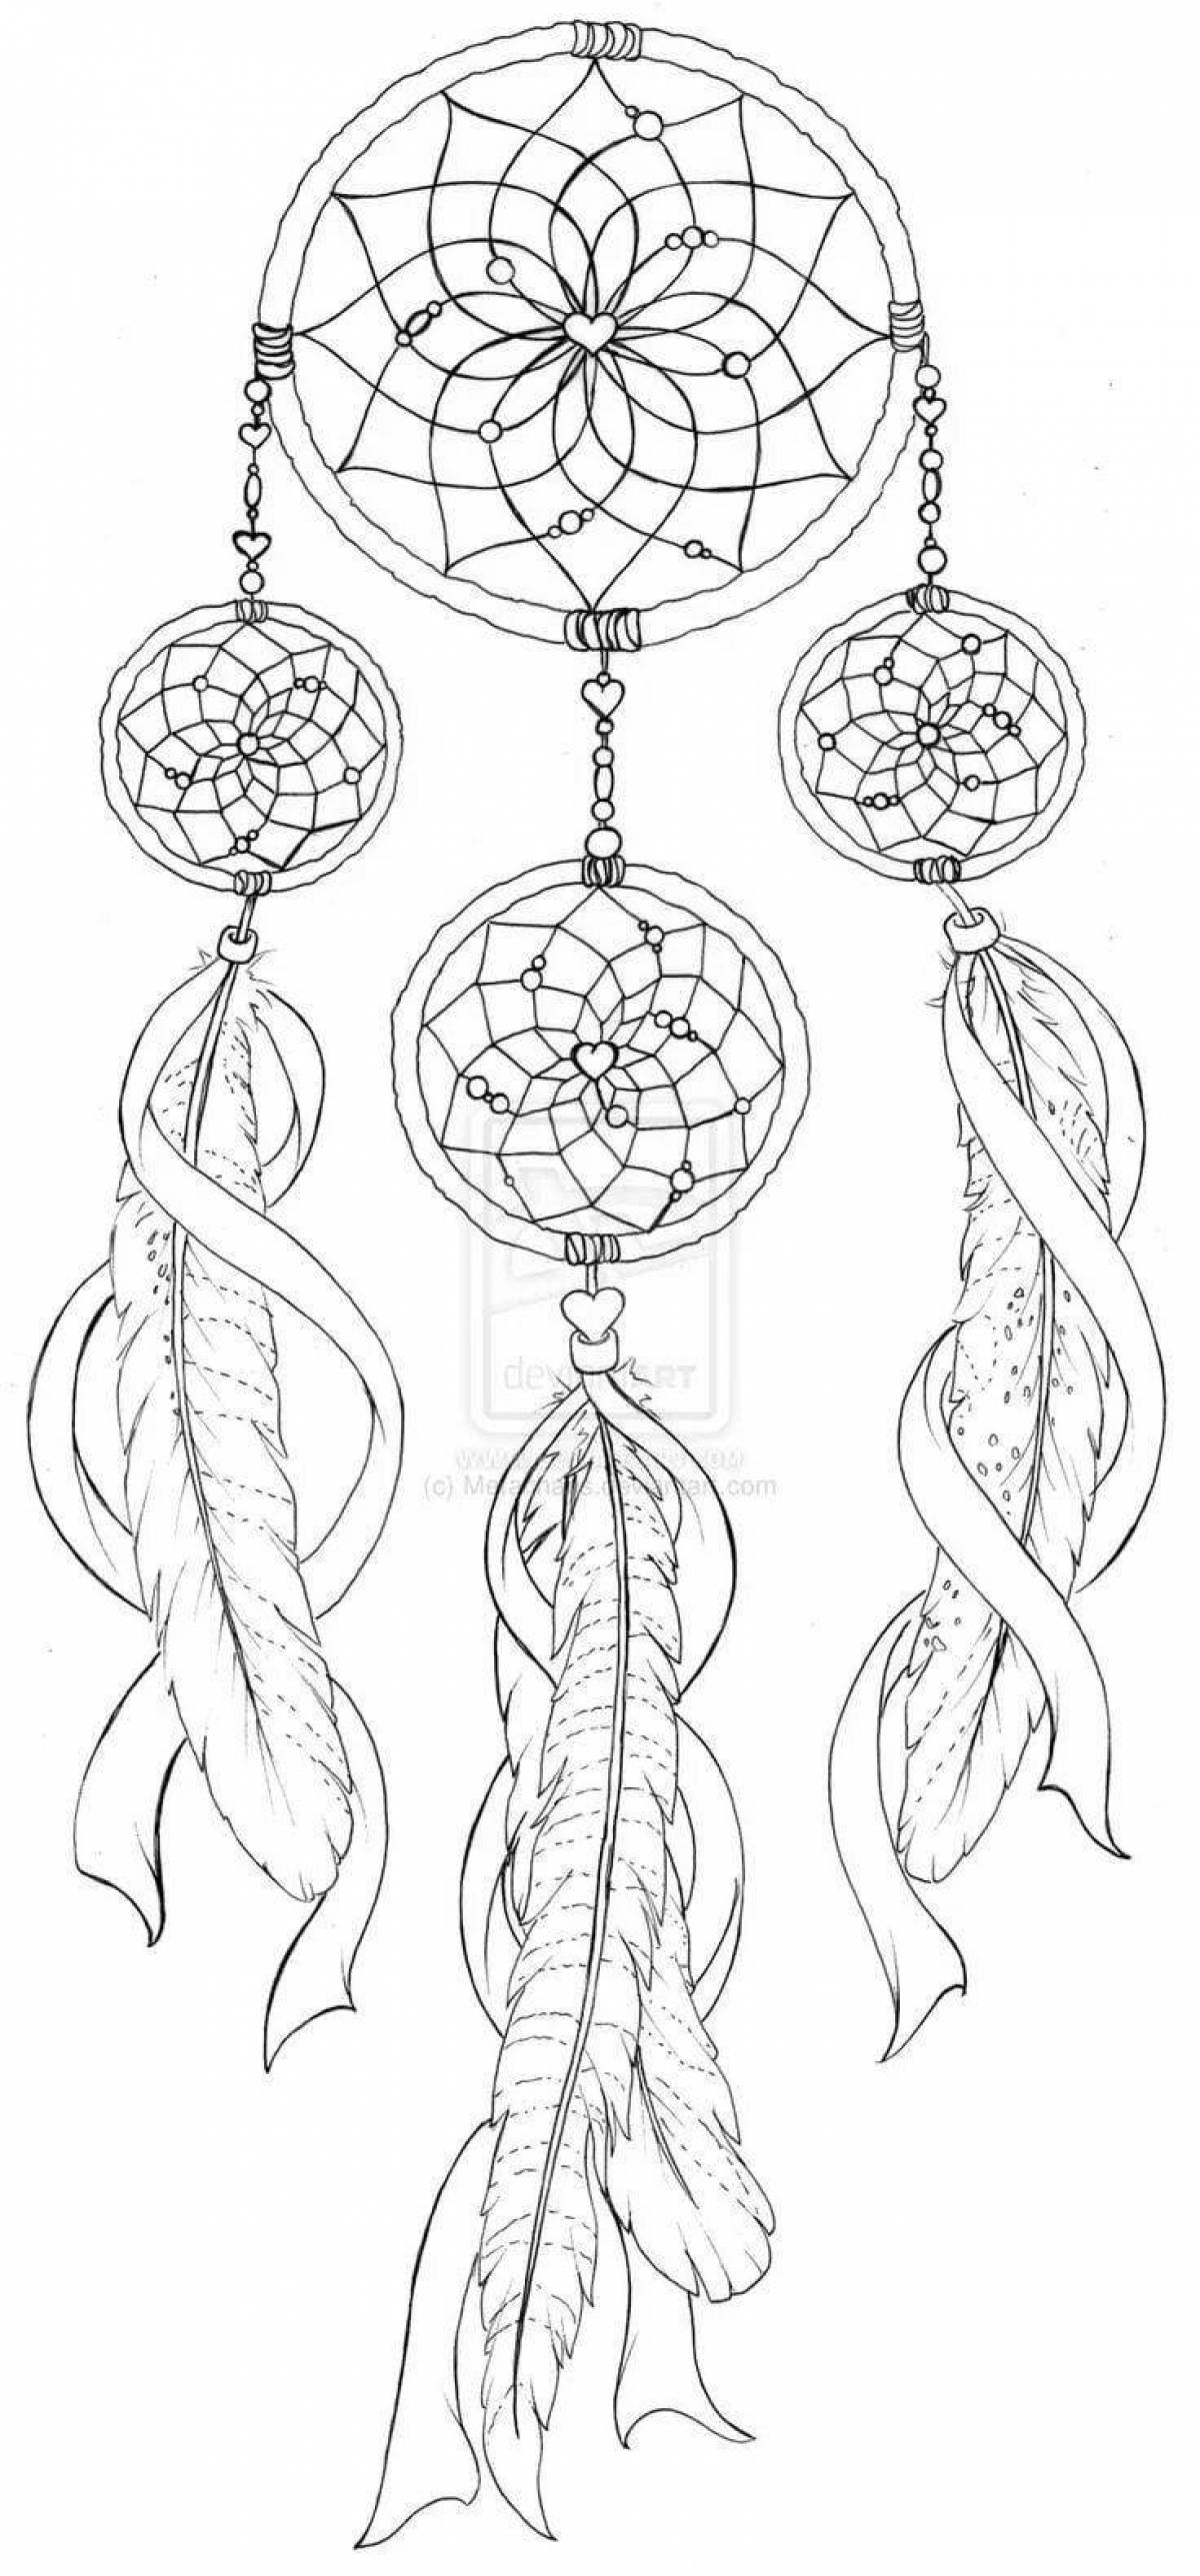 Great dreamcatcher coloring page